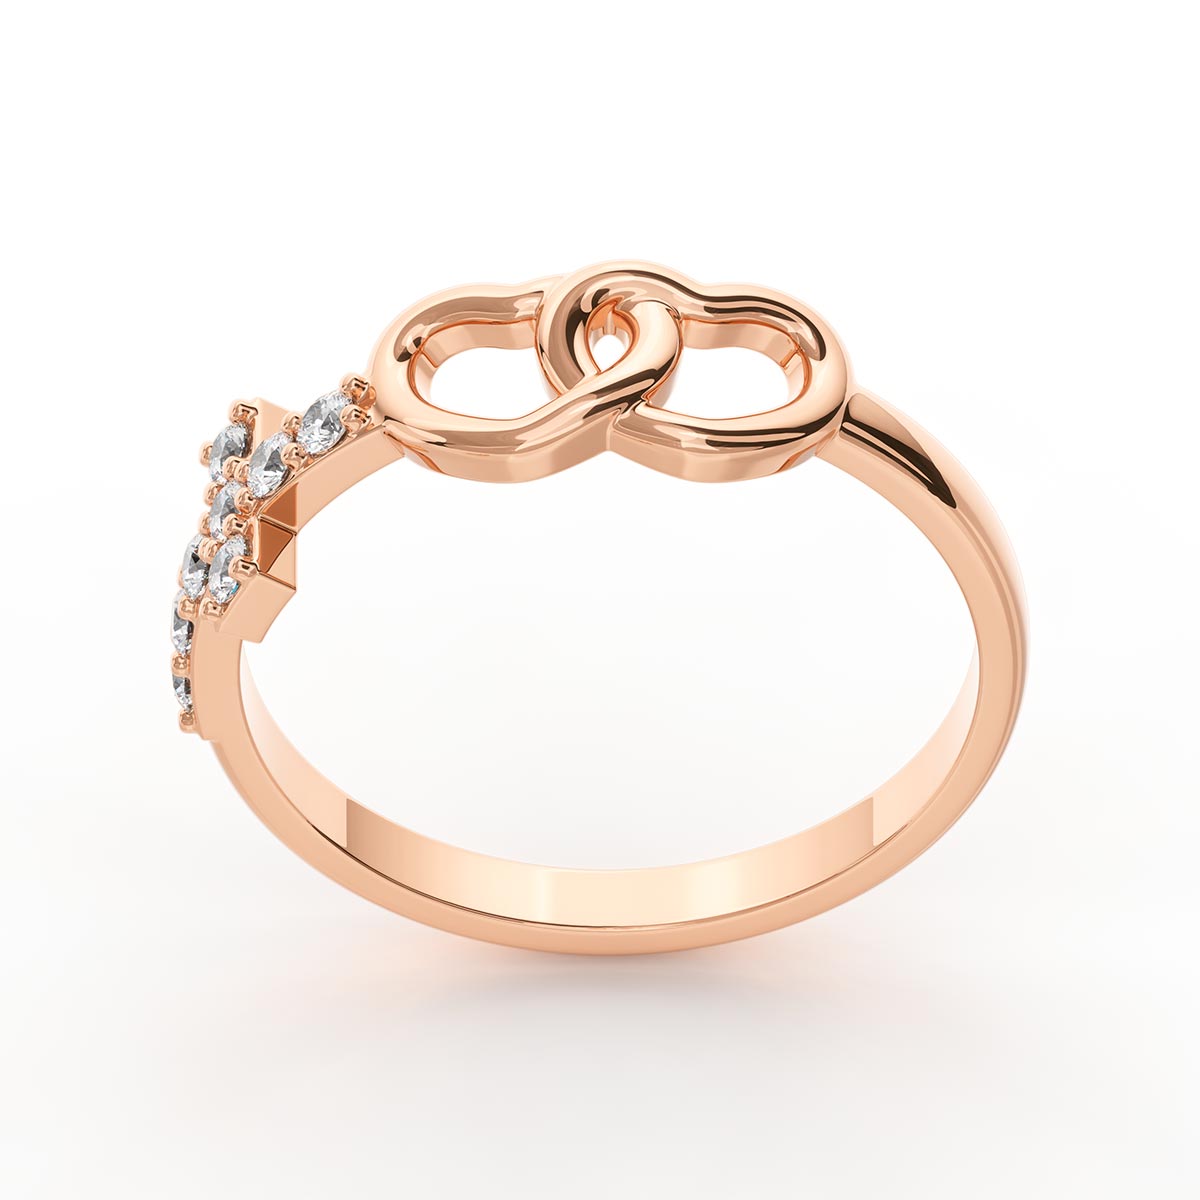 United Hearts with Pavé Cross Ring